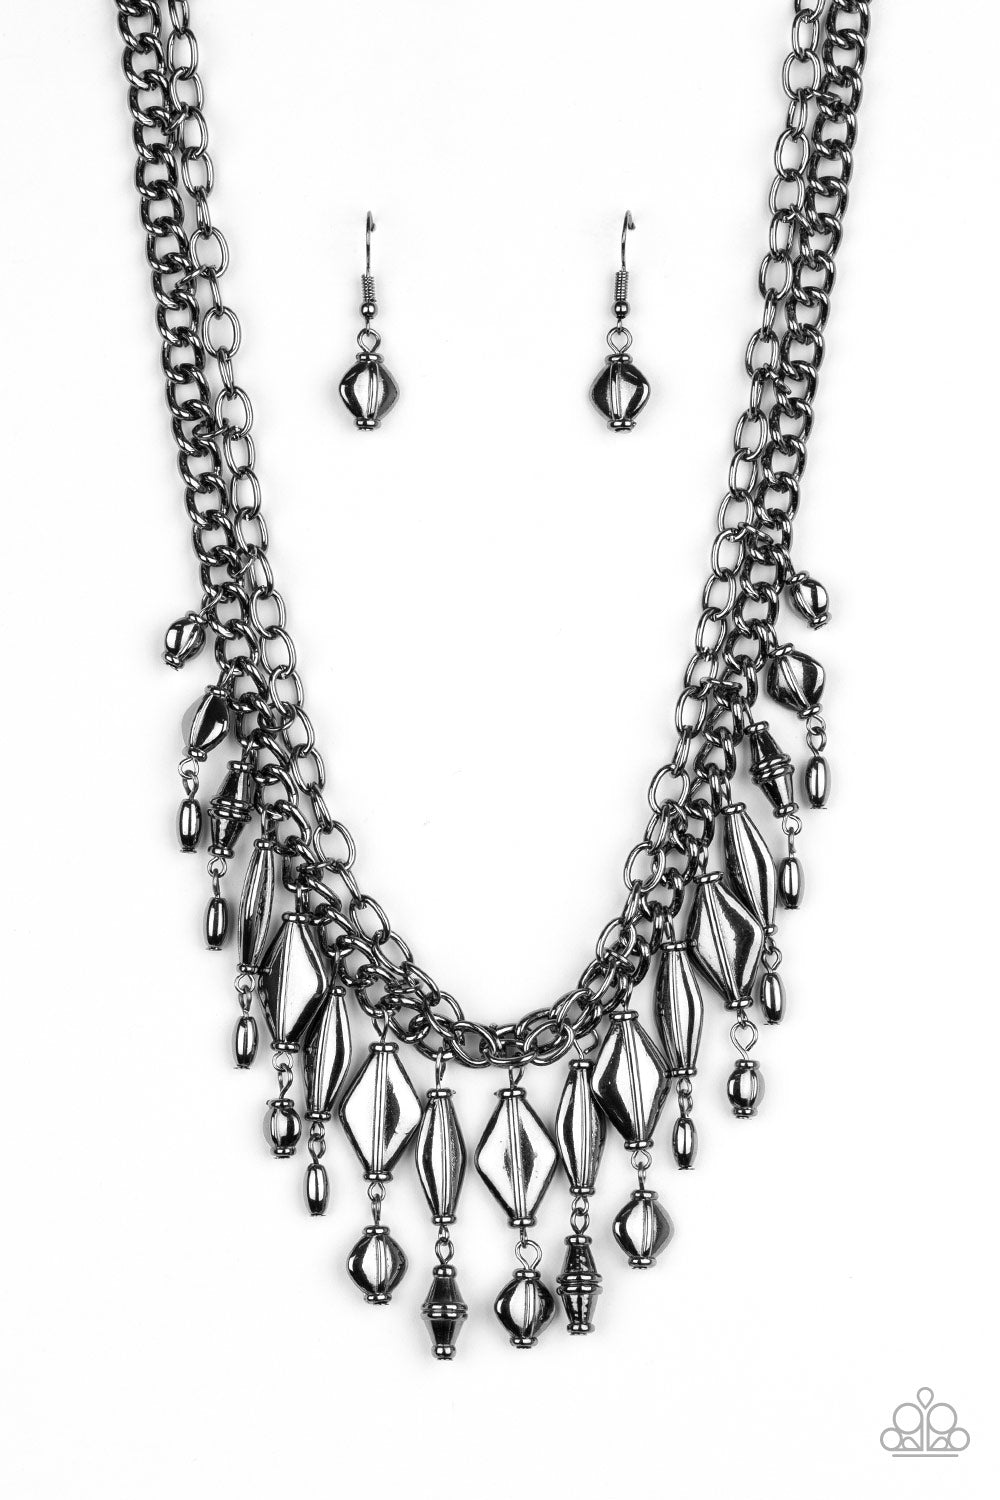 mismatched collection of gunmetal beaded tassels dangle from the bottom of two interconnecting gunmetal chains